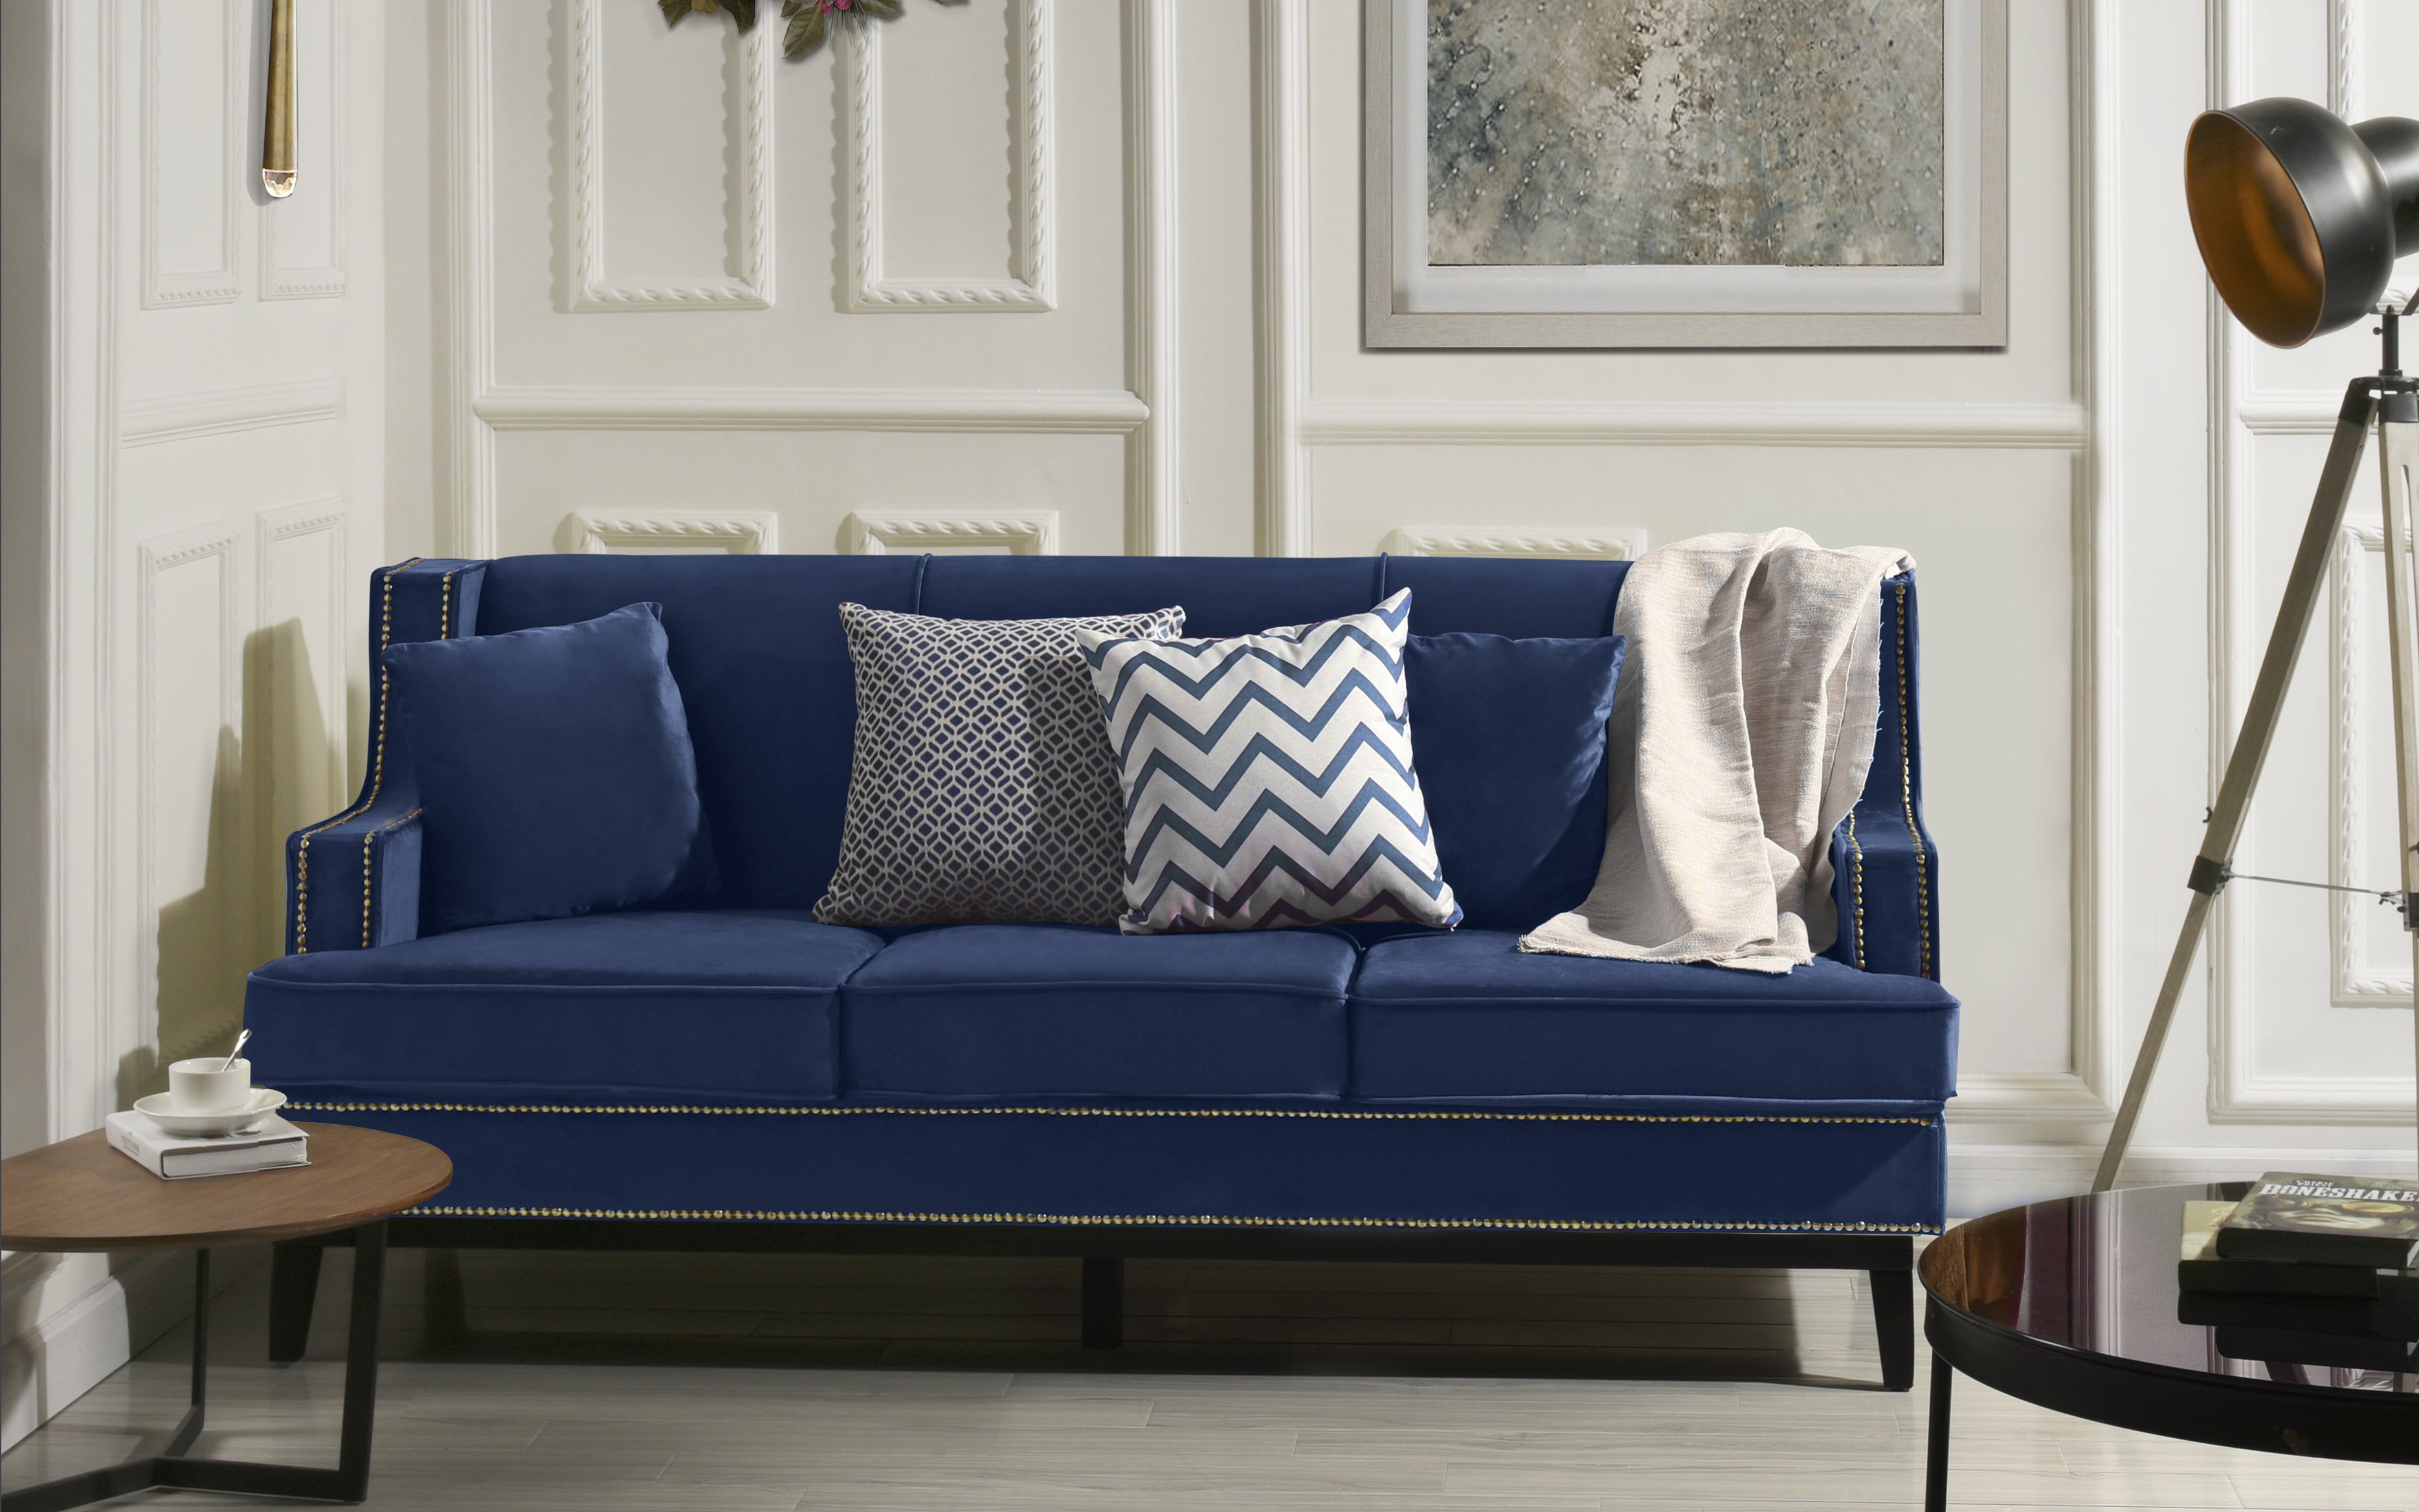 Modern Velvet Sofa with Classic Nailhead Trim and Wooden Legs, Royal